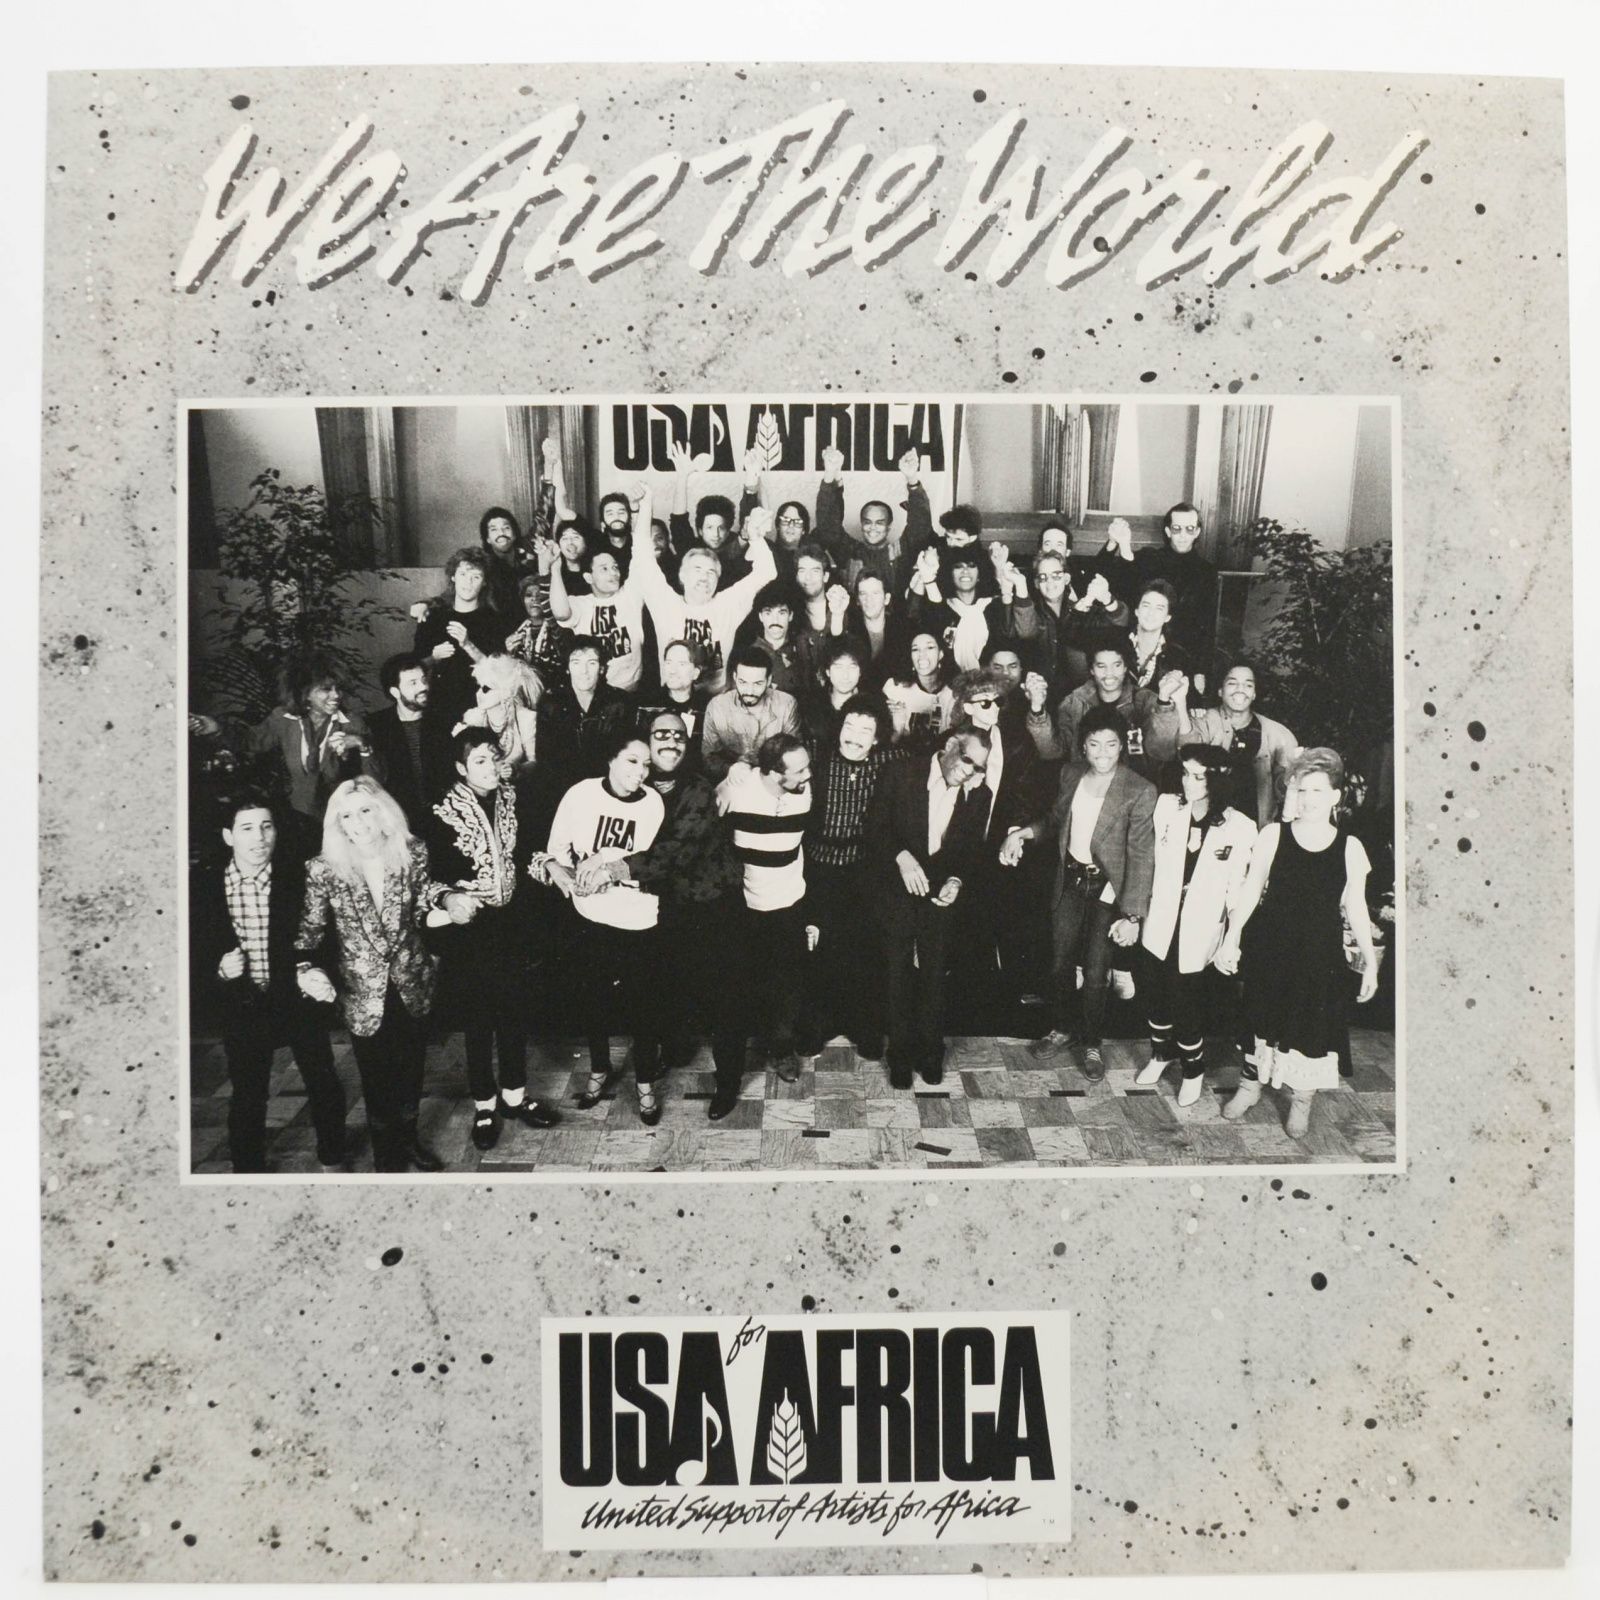 USA For Africa — We Are The World, 1985